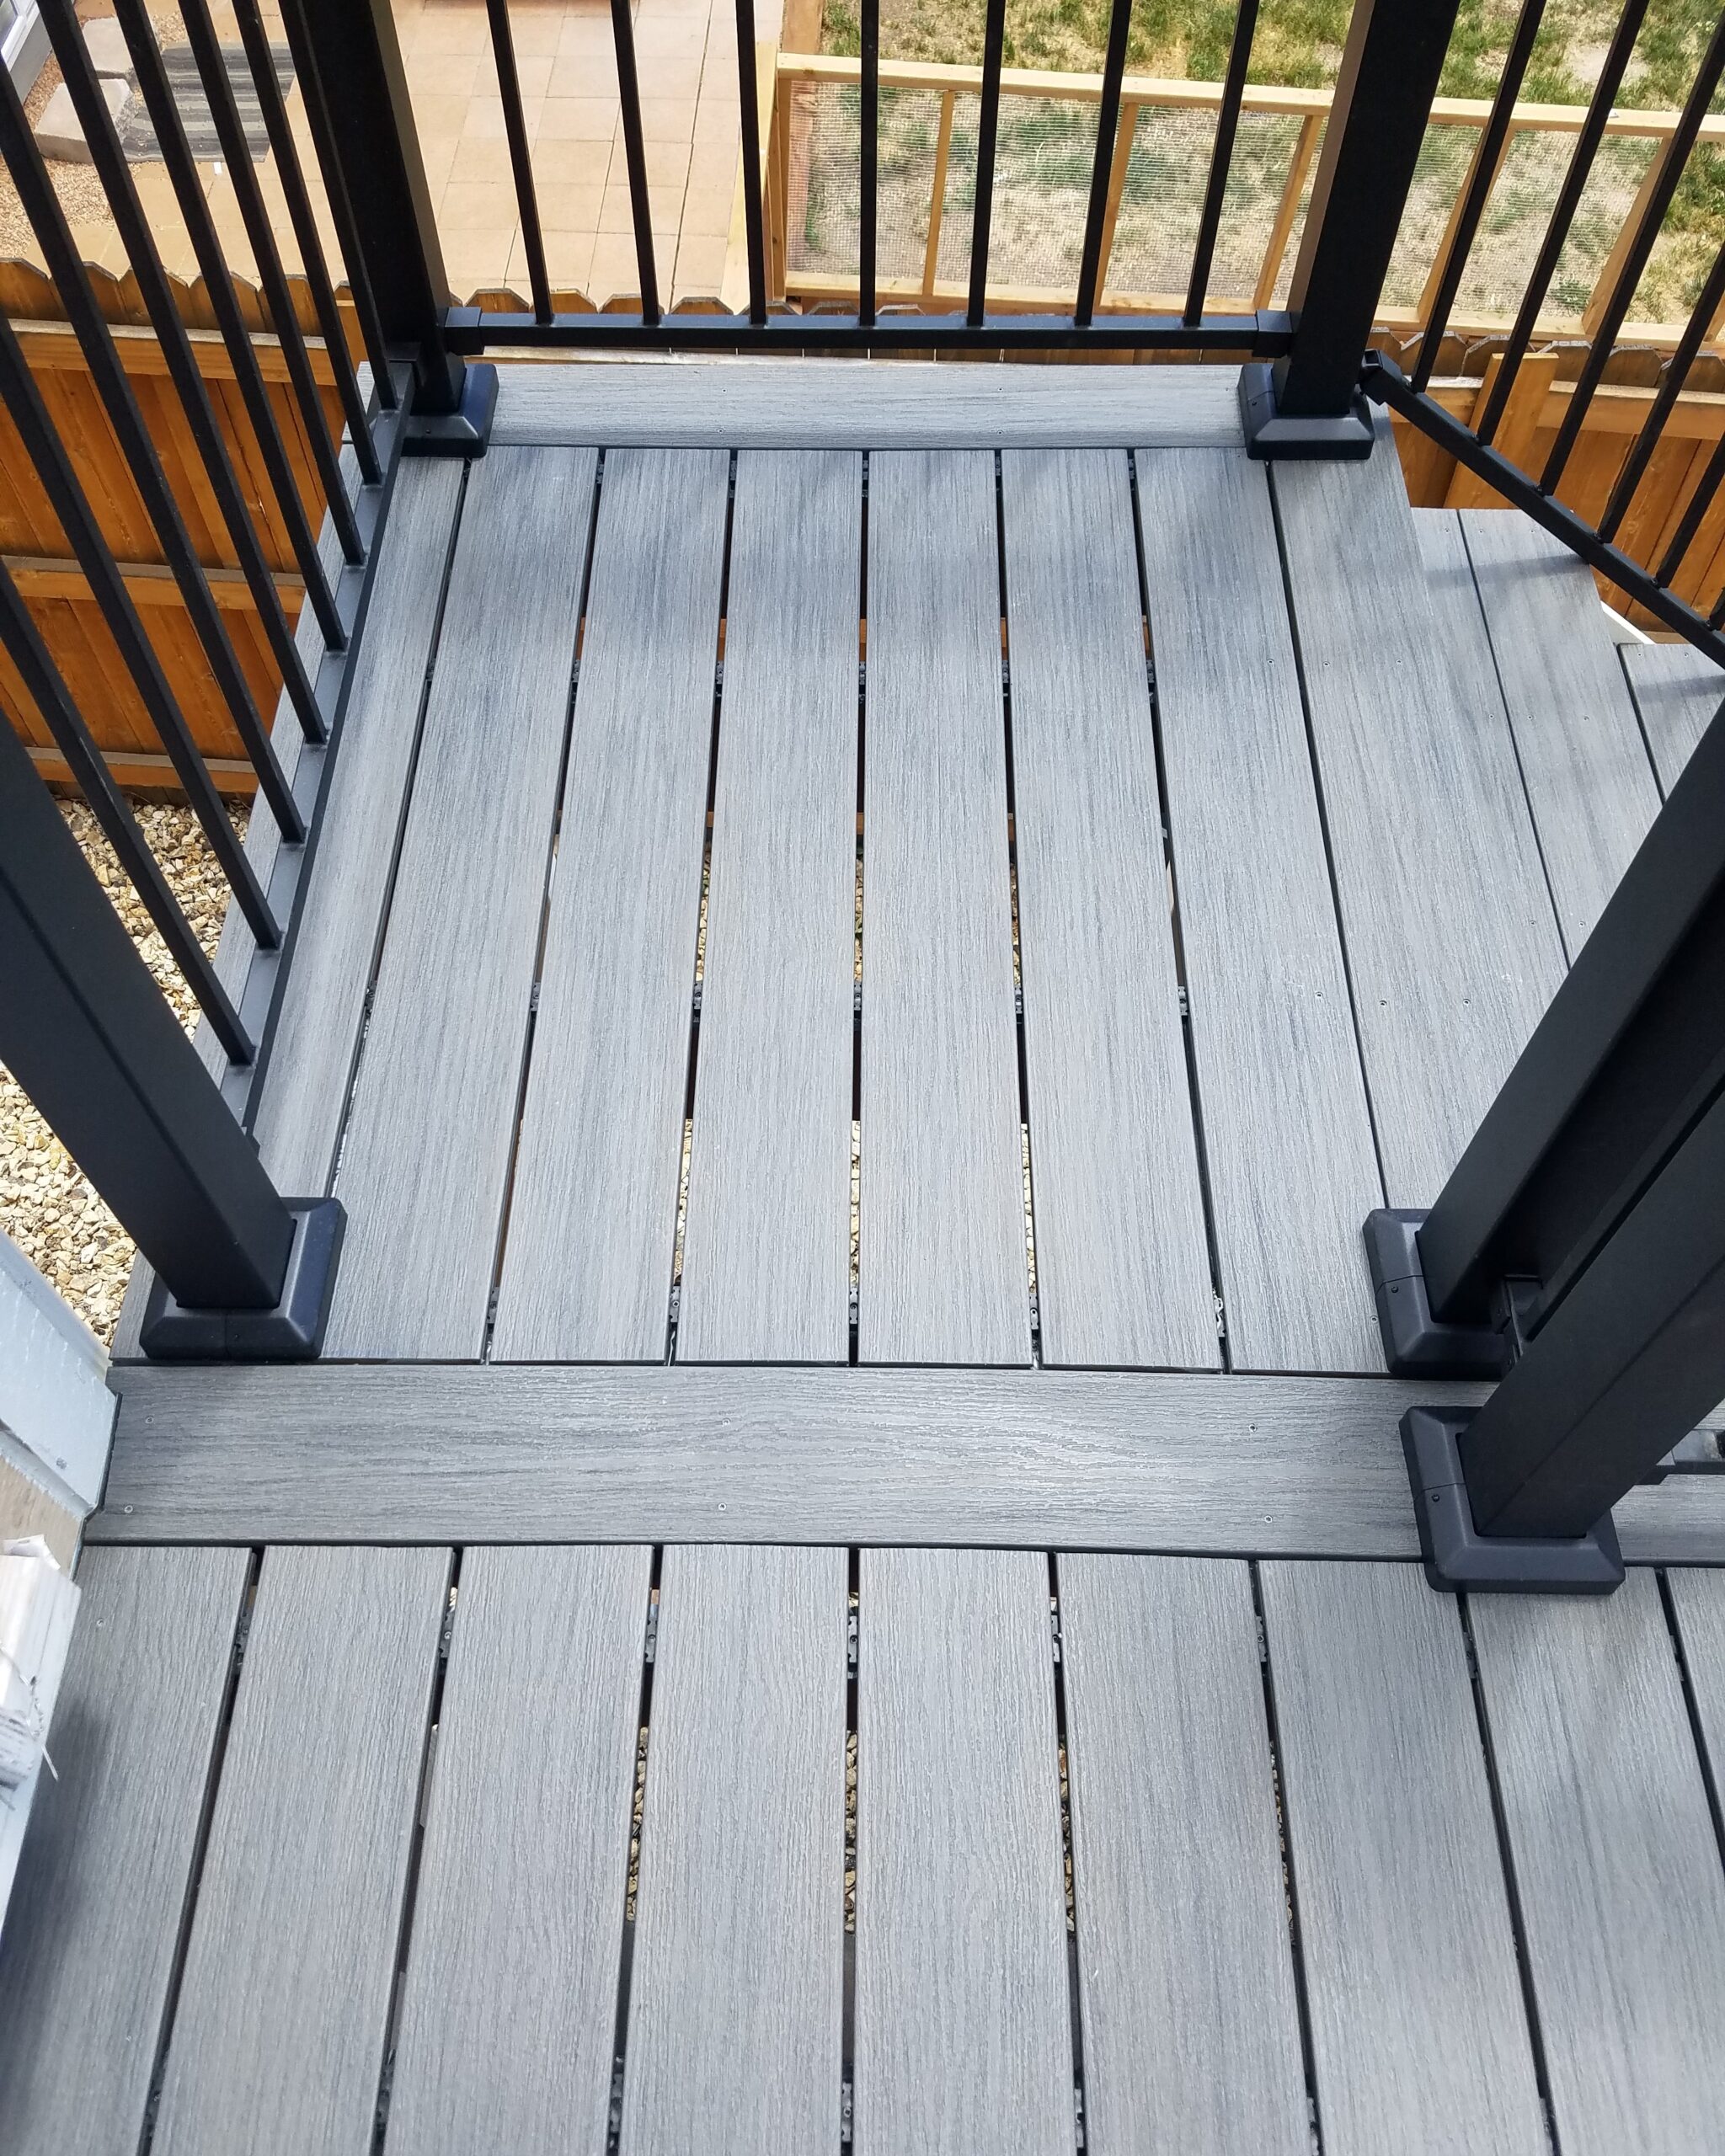 90-degree composite deck with end boards and a Fortress Fe26 metal panel railing in Black.